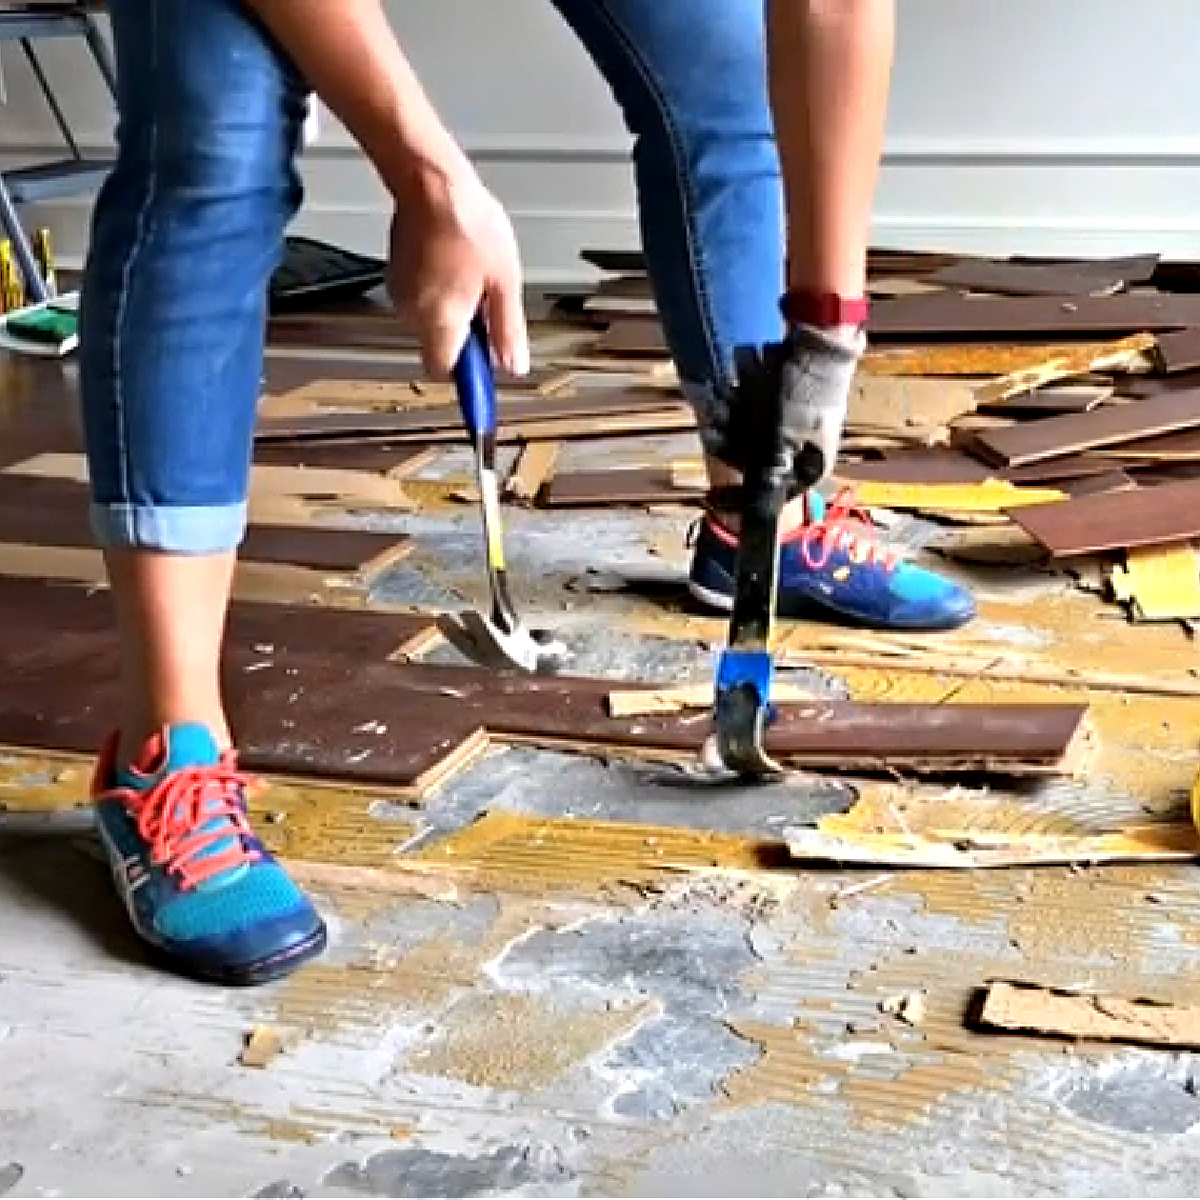 Remove Glued Wood Flooring On Concrete, Cleaning Glue From Hardwood Floors